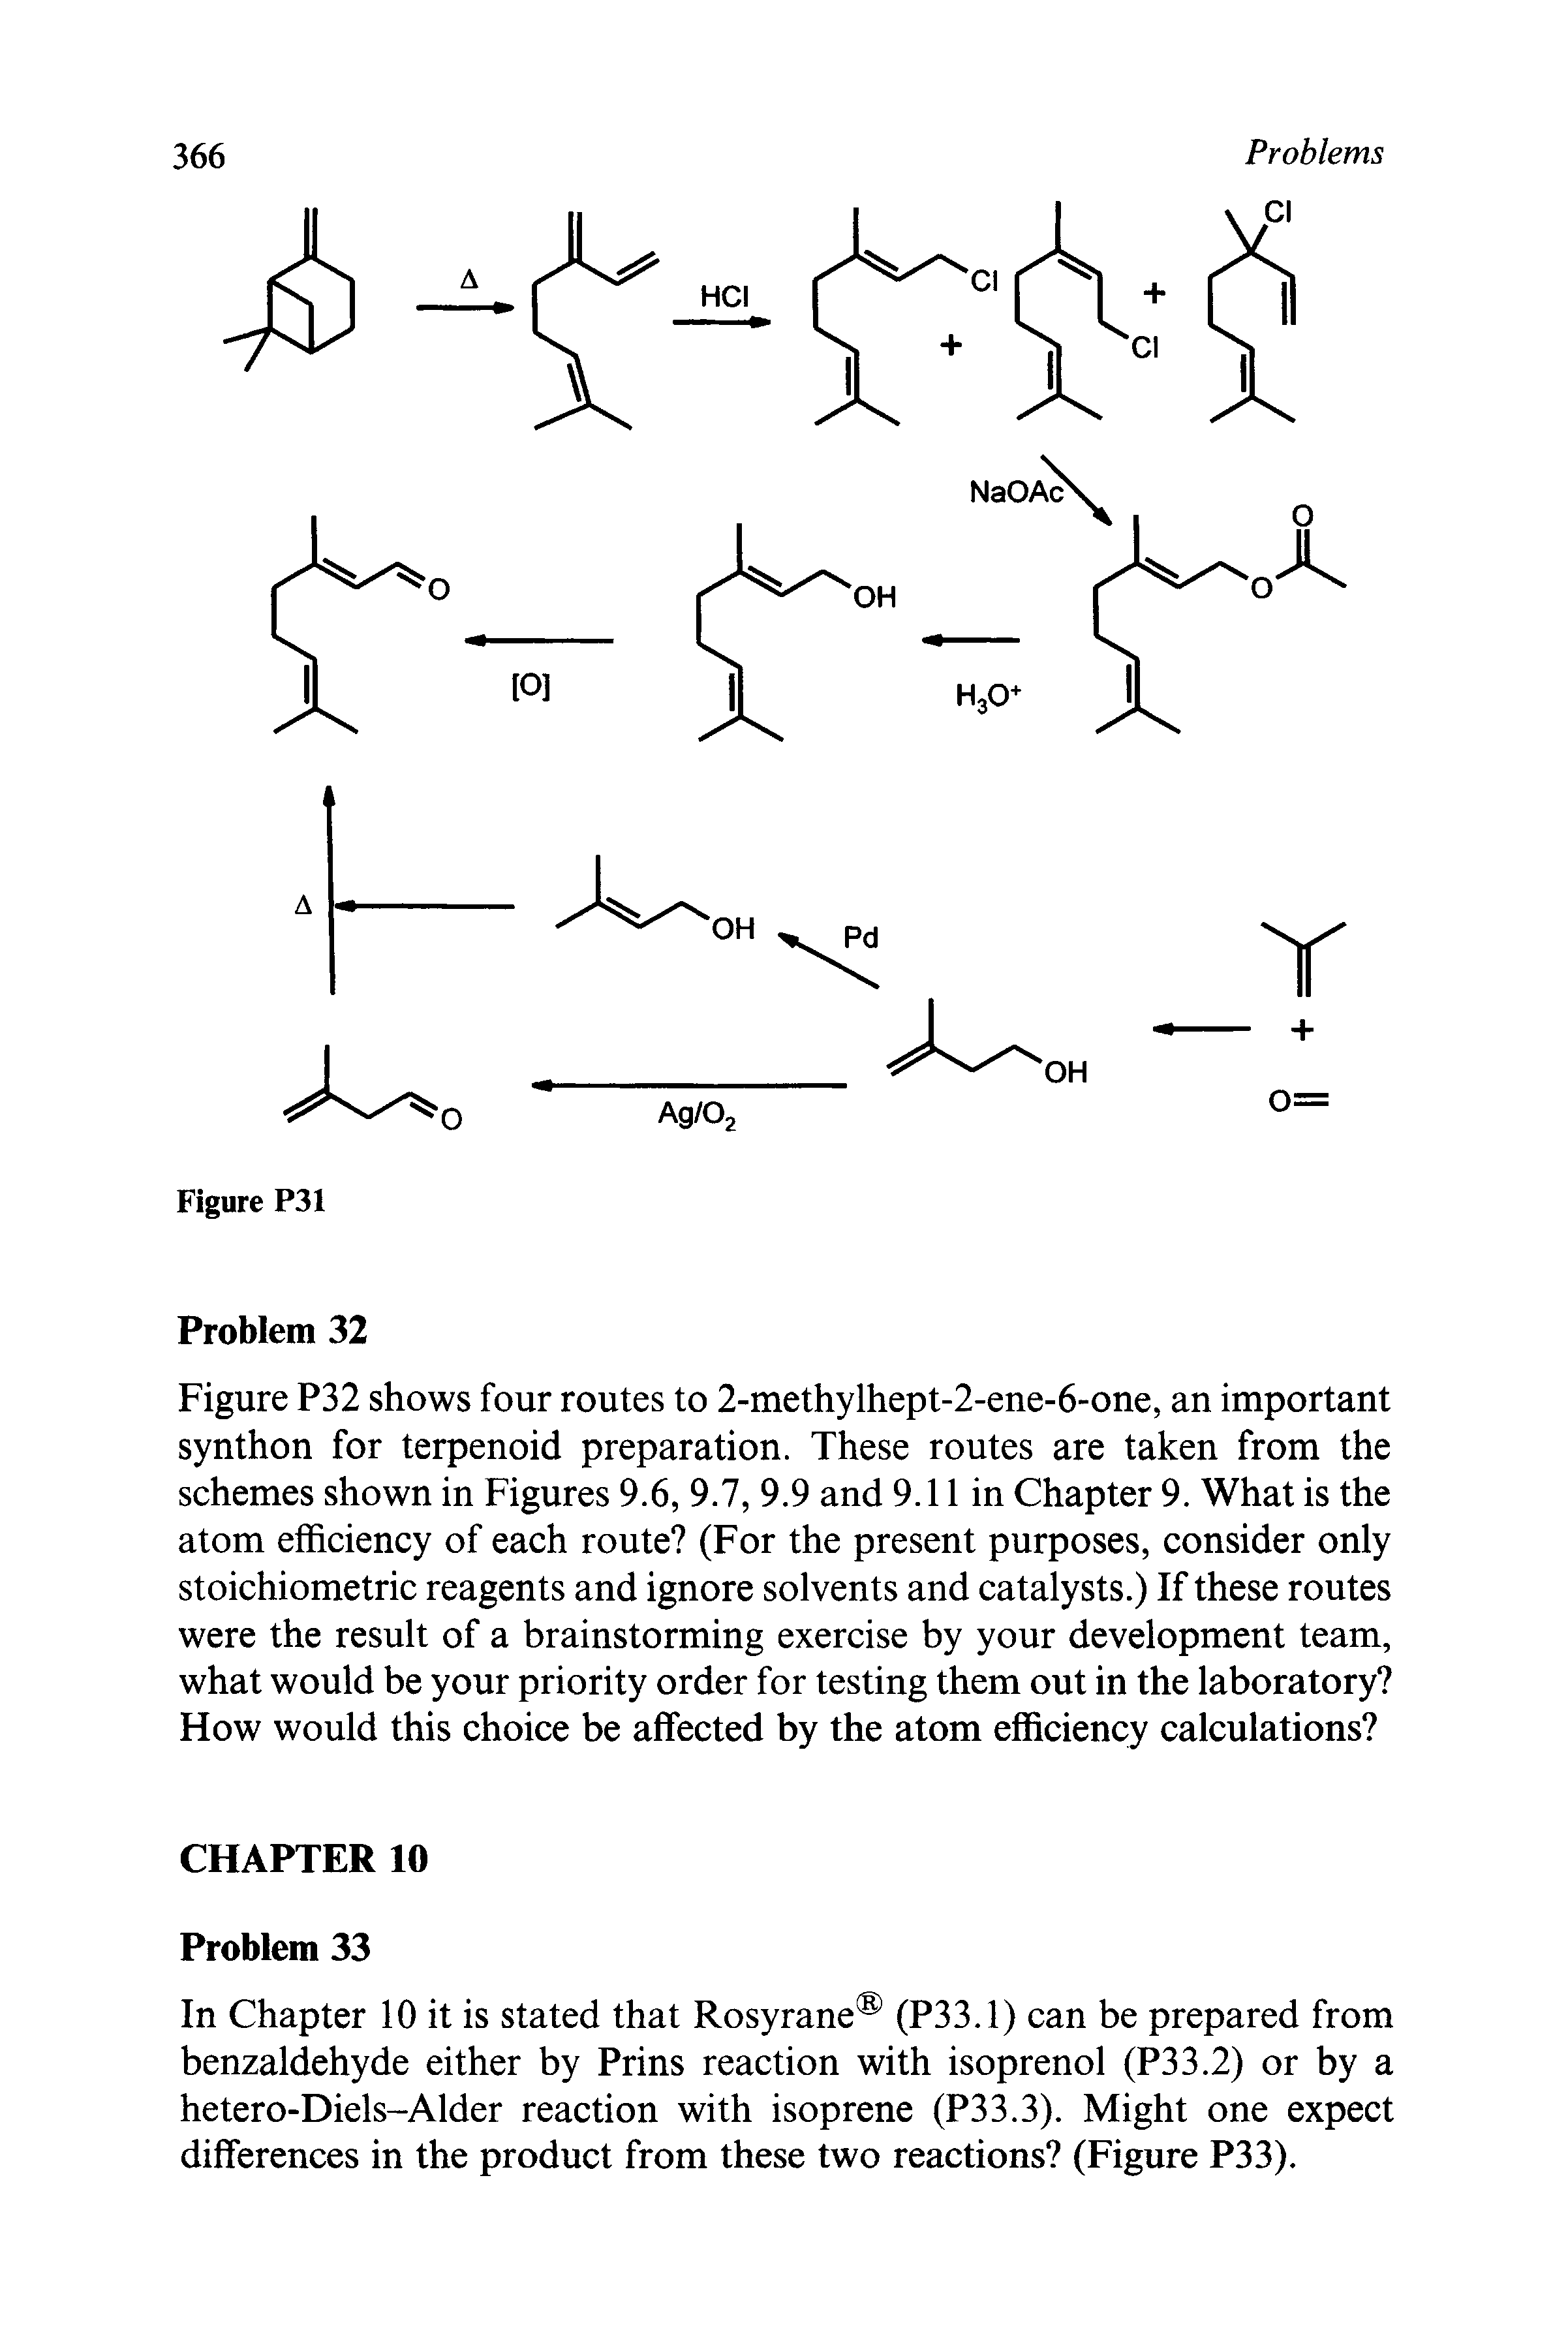 Figure P32 shows four routes to 2-methylhept-2-ene-6-one, an important synthon for terpenoid preparation. These routes are taken from the schemes shown in Figures 9.6, 9.7, 9.9 and 9.11 in Chapter 9. What is the atom efficiency of each route (For the present purposes, consider only stoichiometric reagents and ignore solvents and catalysts.) If these routes were the result of a brainstorming exercise by your development team, what would be your priority order for testing them out in the laboratory How would this choice be affected by the atom efficiency calculations ...